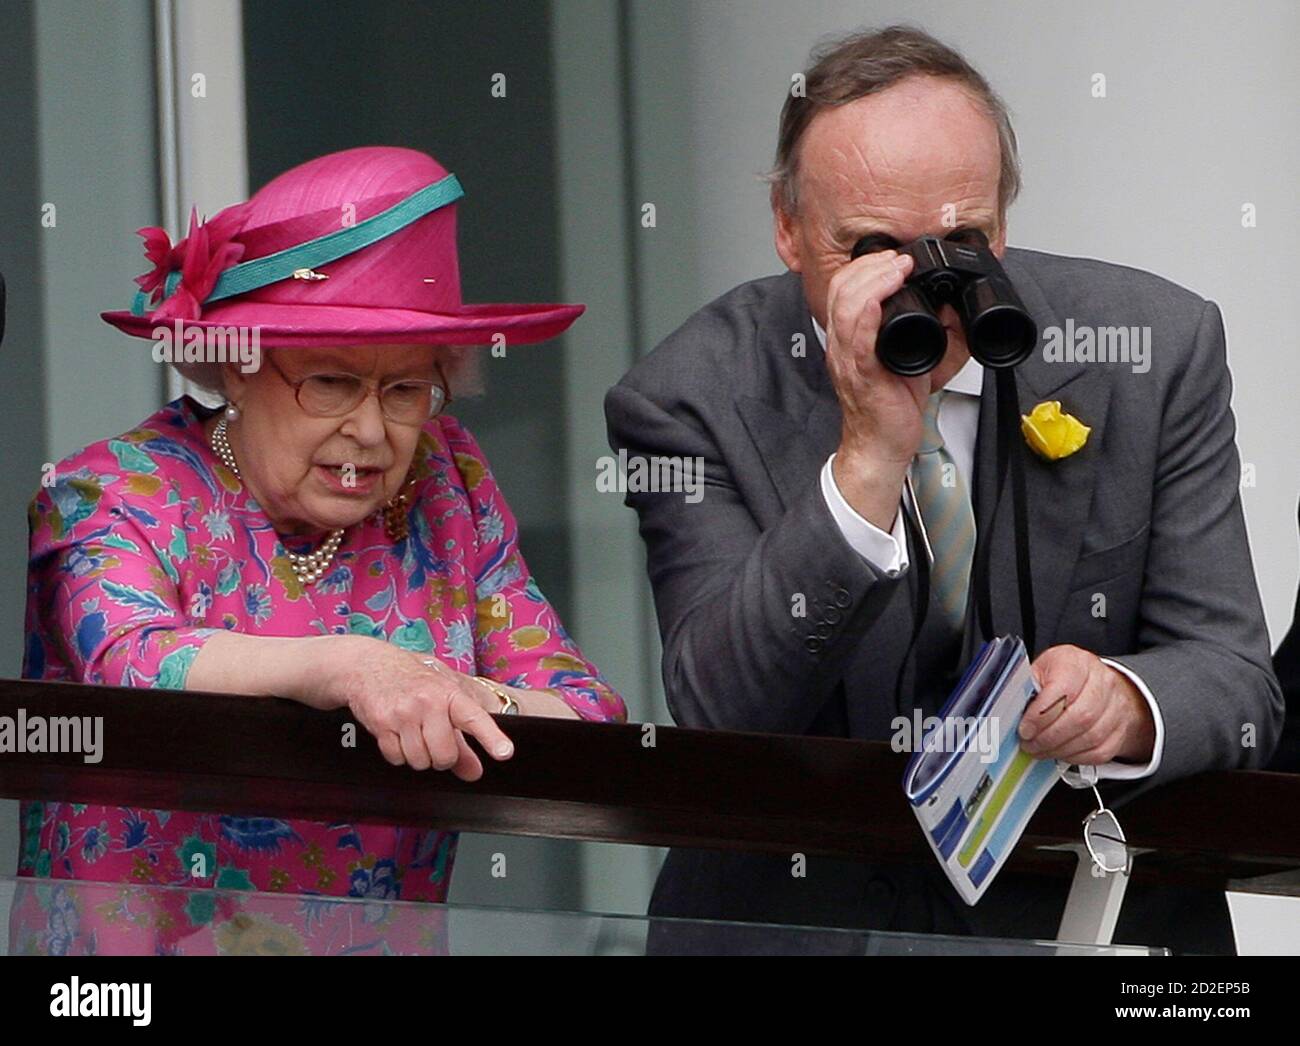 Britain's Queen Elizabeth (L) watches during the Epsom Derby Festival at Epsom Downs in Surrey, southern England, June 7, 2008.    REUTERS/Darren Staples   (BRITAIN) Stock Photo